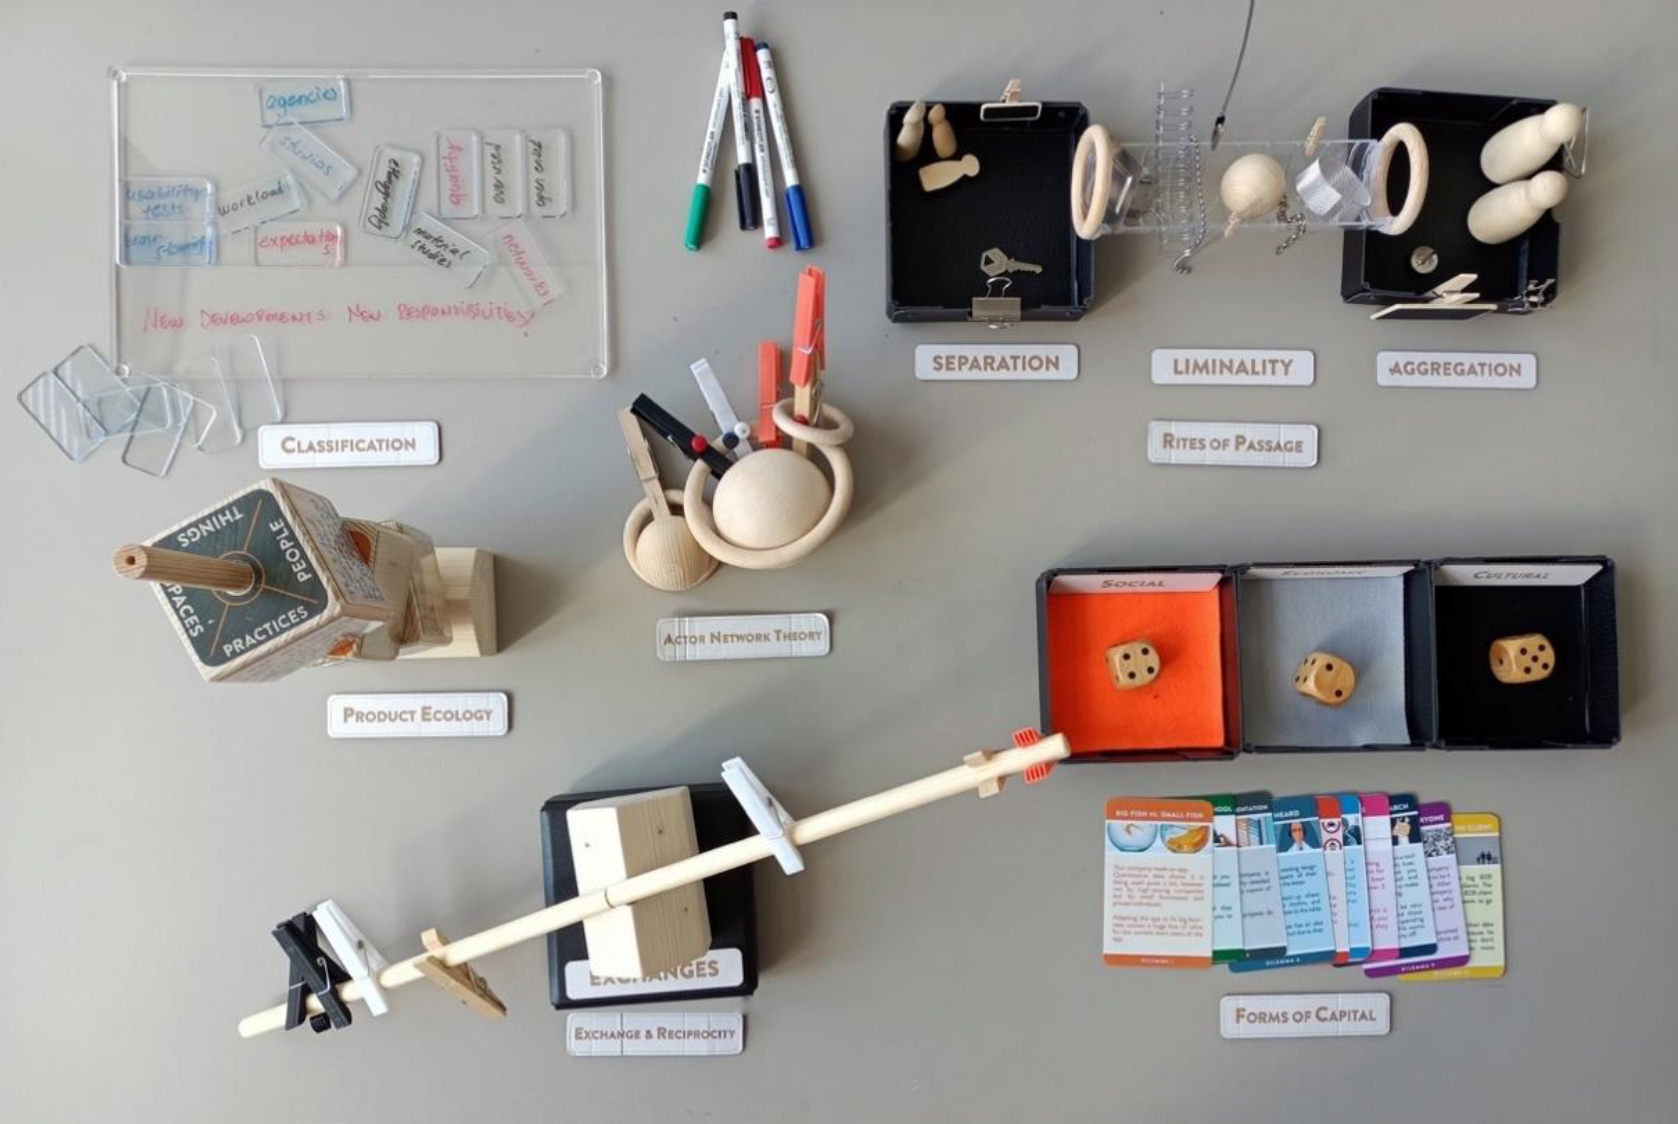 An array of objects lie organized on a table in small clusters, each cluster next to a label. The labels depict the names of different theories: Classification, Rites of Passage, Product Ecology, Actor Network Theory, Exchange & Reciprocity, and Forms of Capital. The objects (cards, wooden balls, clothespins, rods, cubes, dice, etc.) are made of unstained wood, clear acrylic, and plastic in black, white, and orange. There are some dry-erase pens lying beside the clear acrylic pieces. Together, these objects and their labels are a set of Theory Instruments.